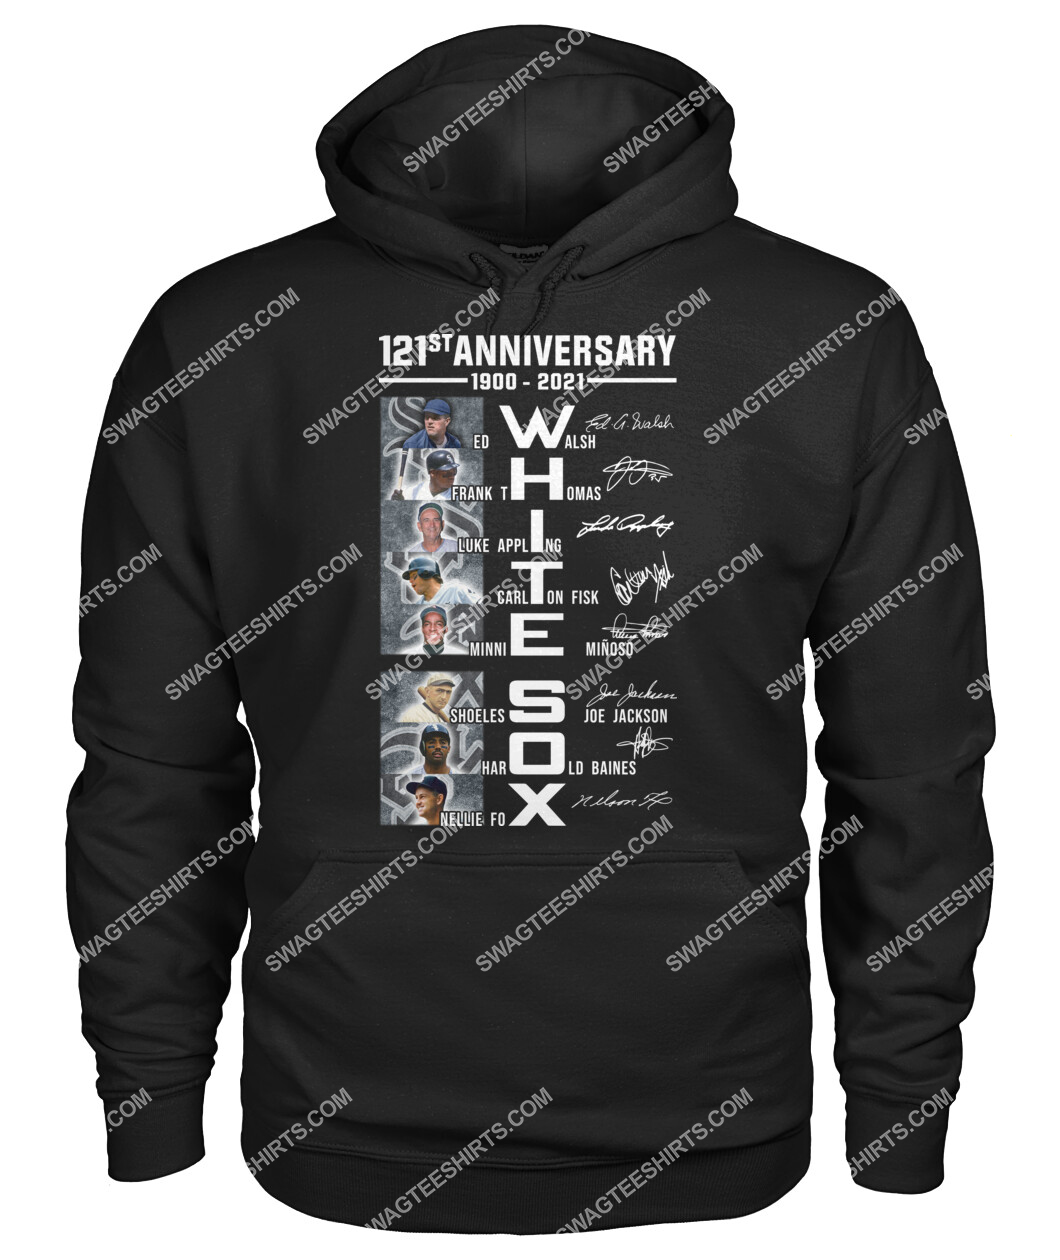 the chicago white sox 121st anniversary 1900 2021 signatures hoodie 1